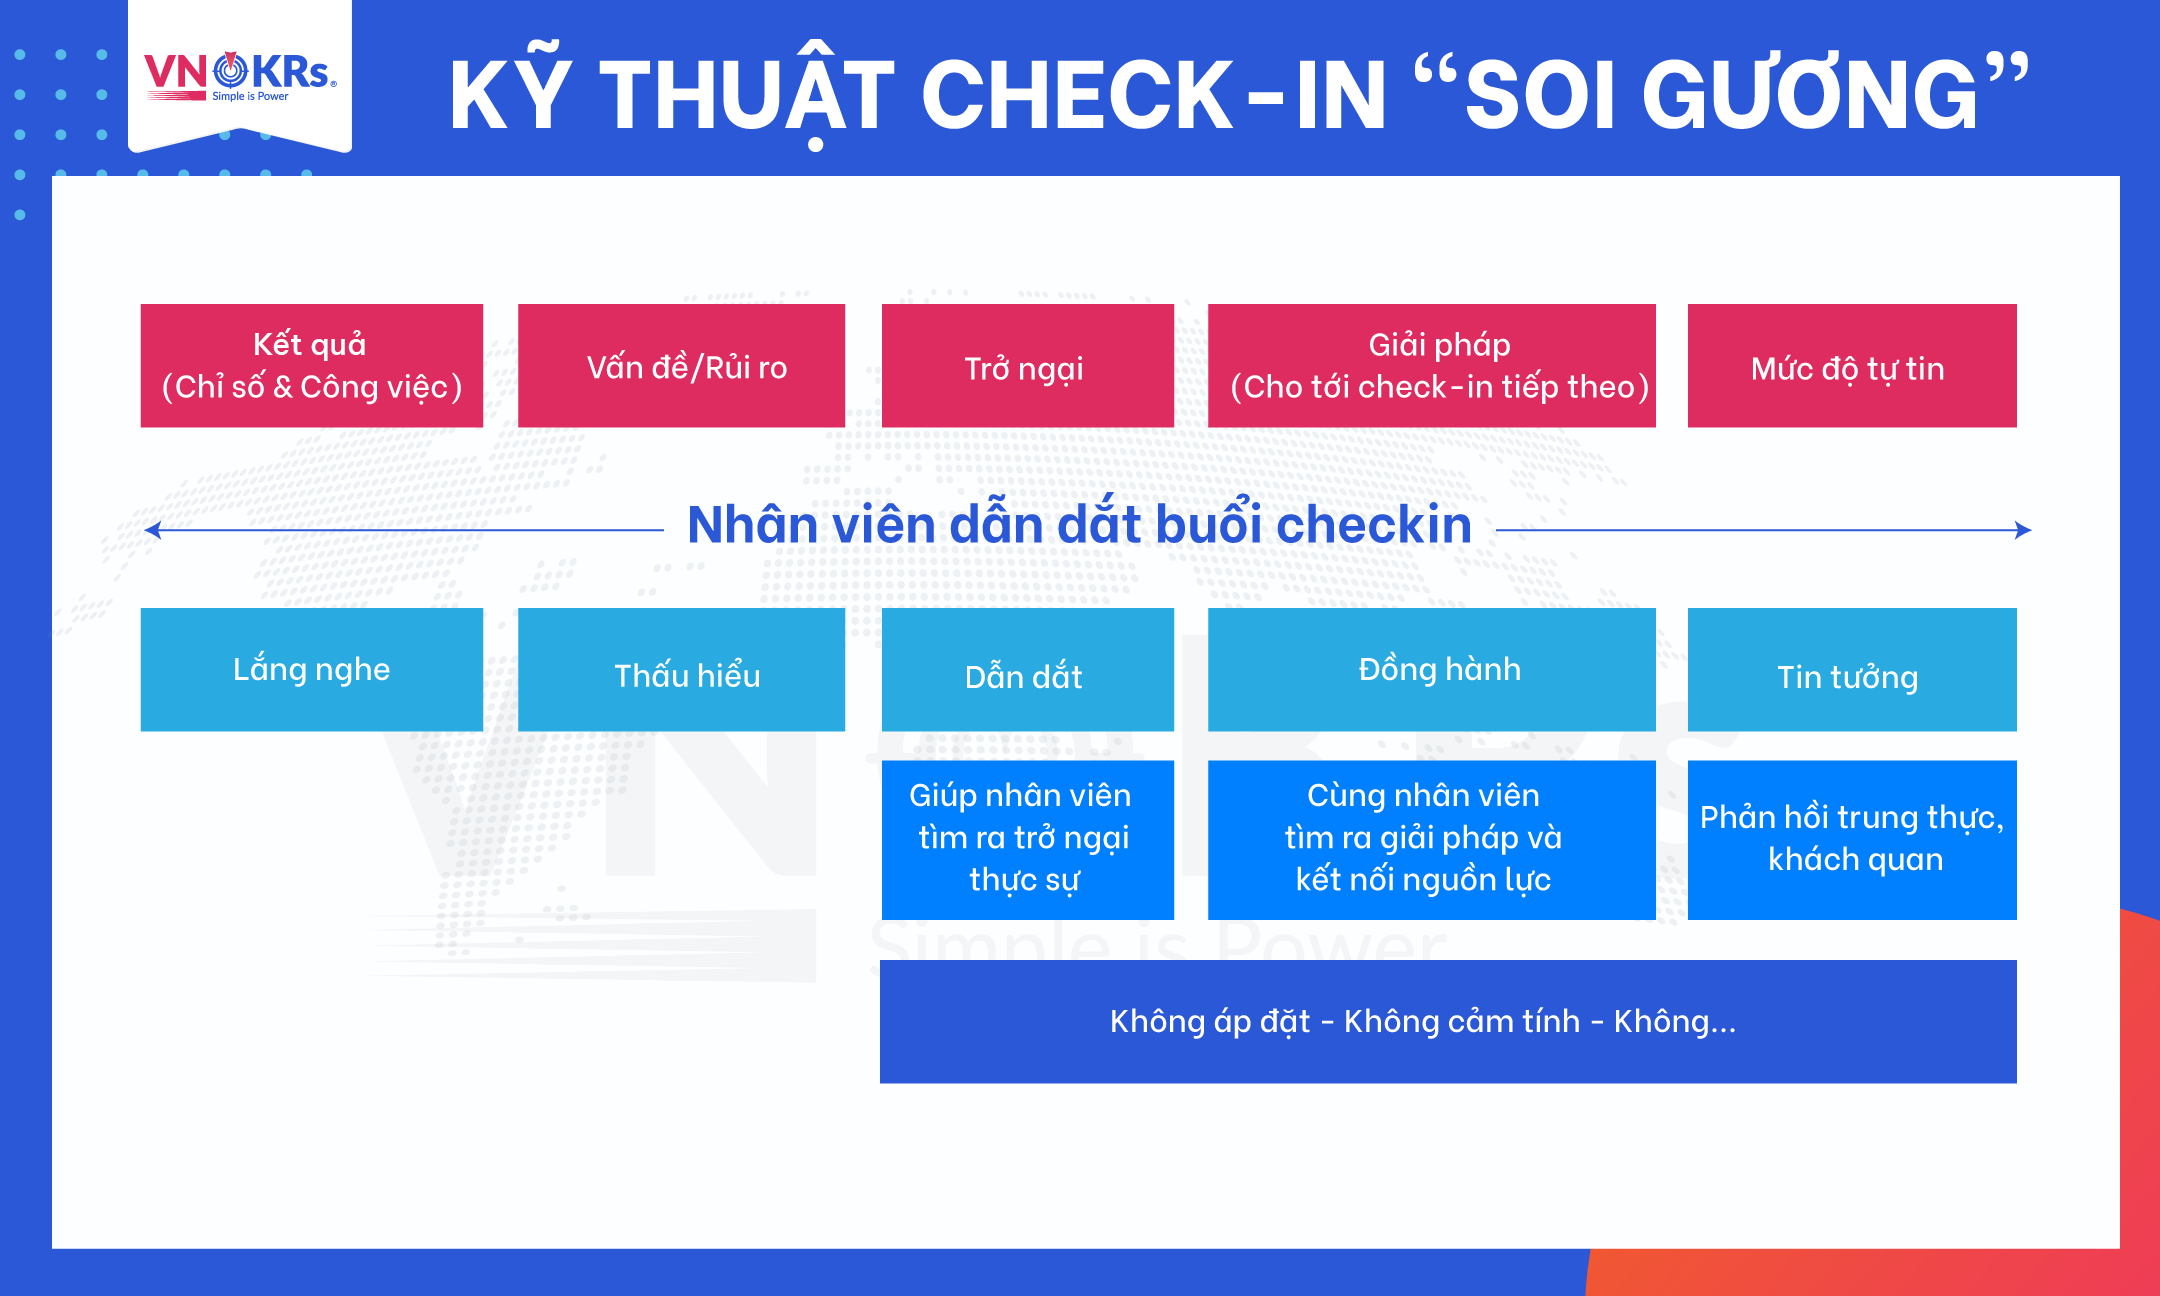 Kỹ thuật Check-in